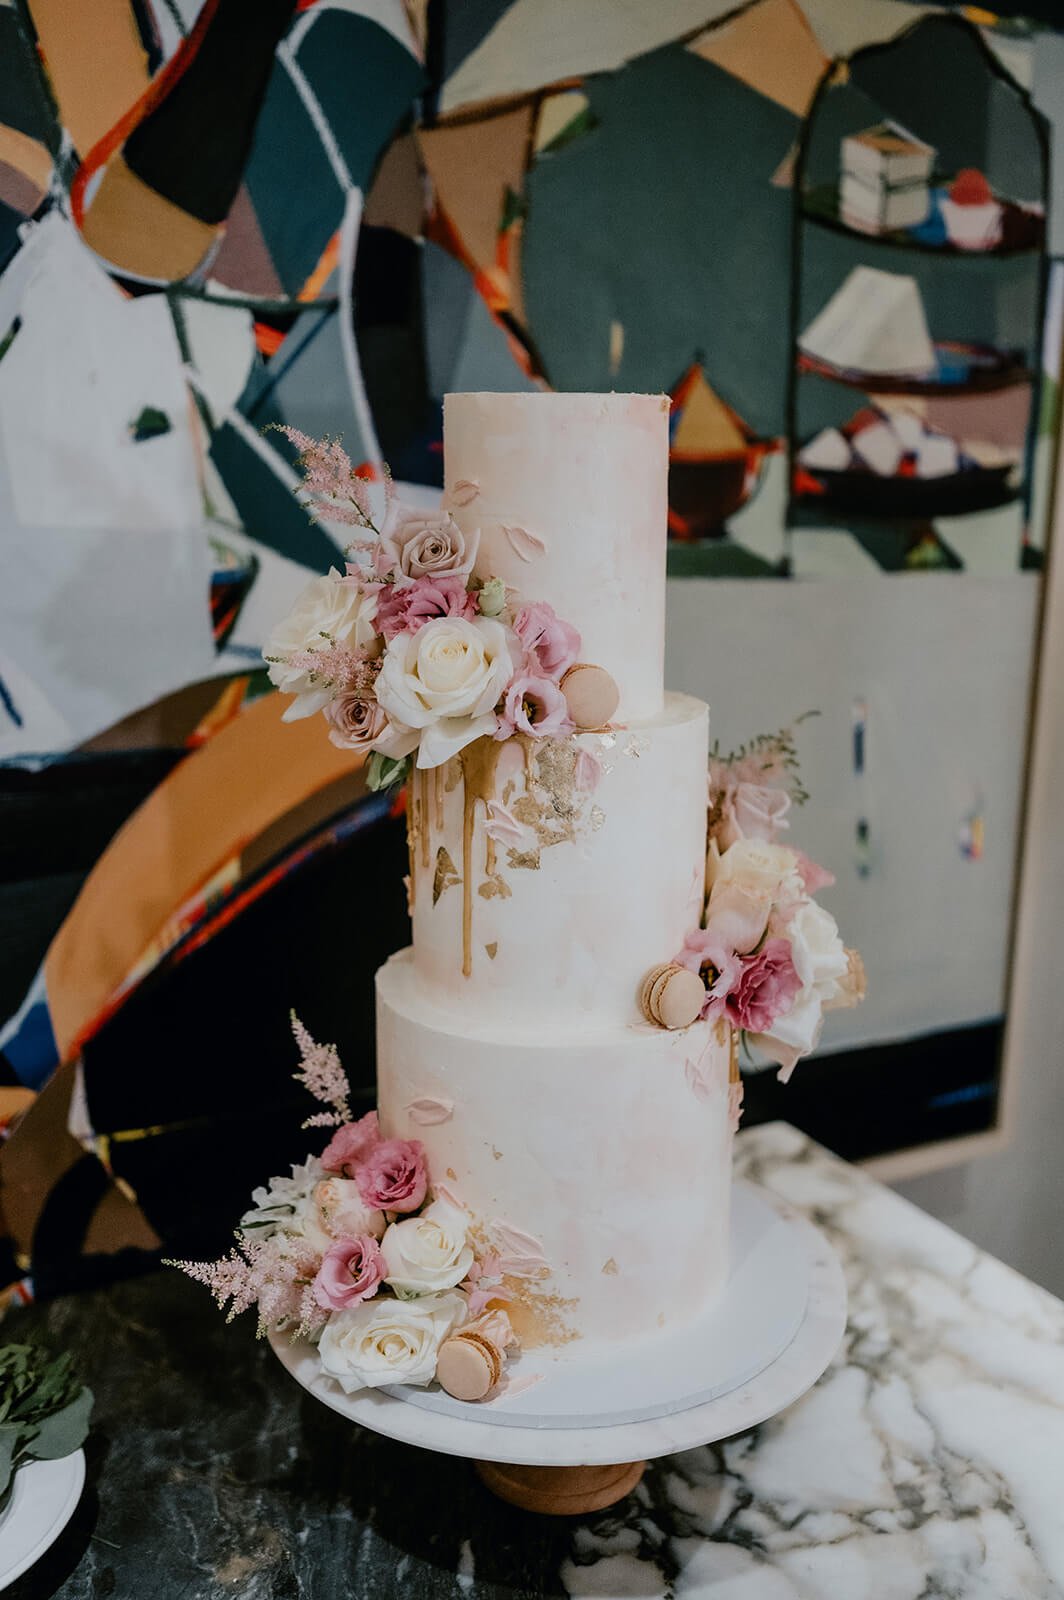 Wedding-cake-with-white-and-pink-flowers.jpg